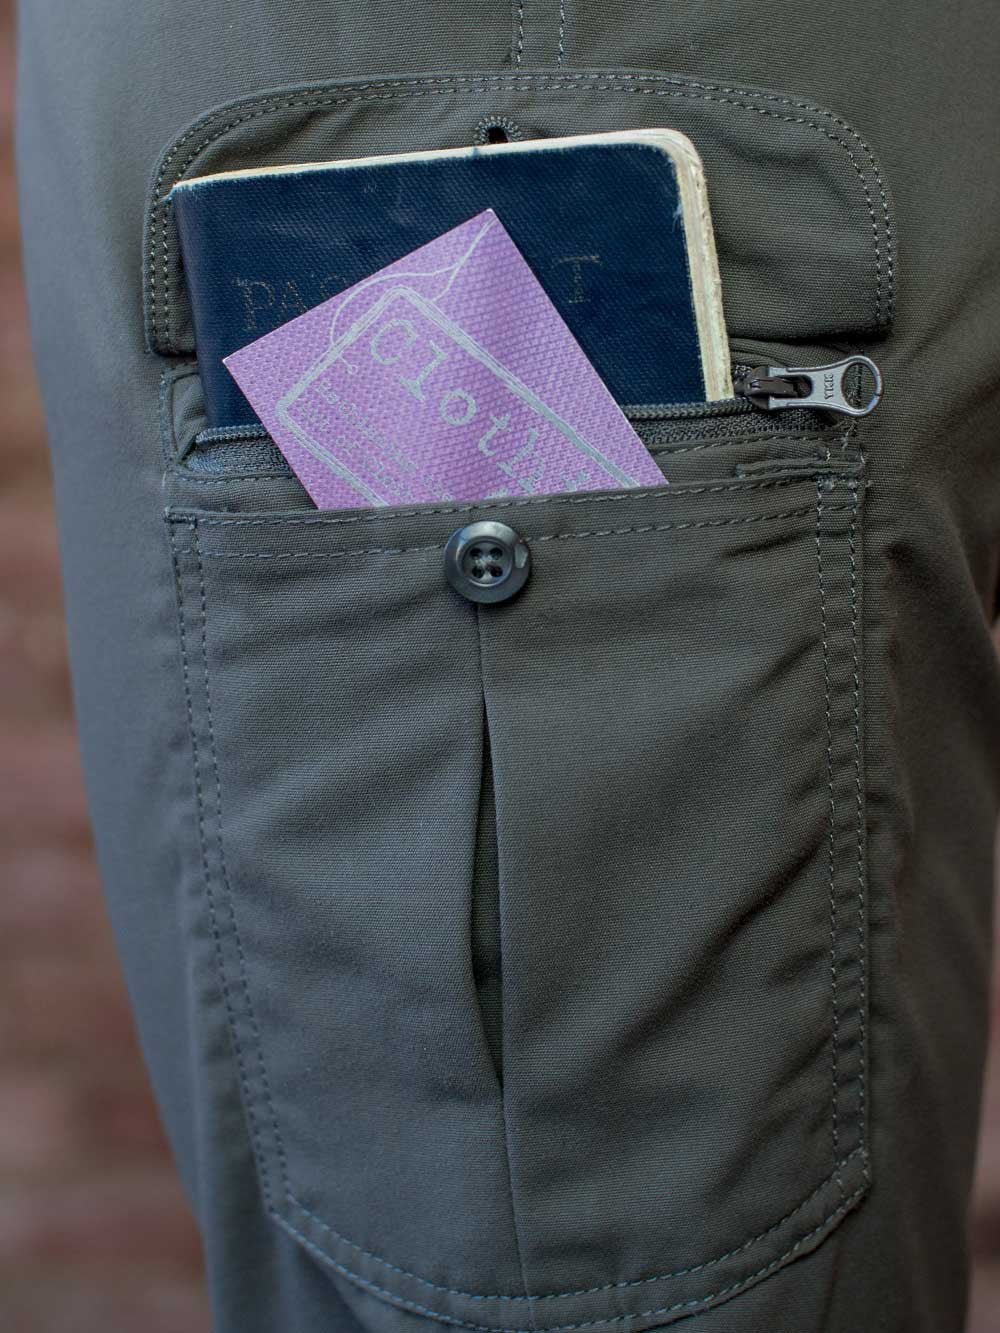 Get your pair of Pickpocket-proof pants